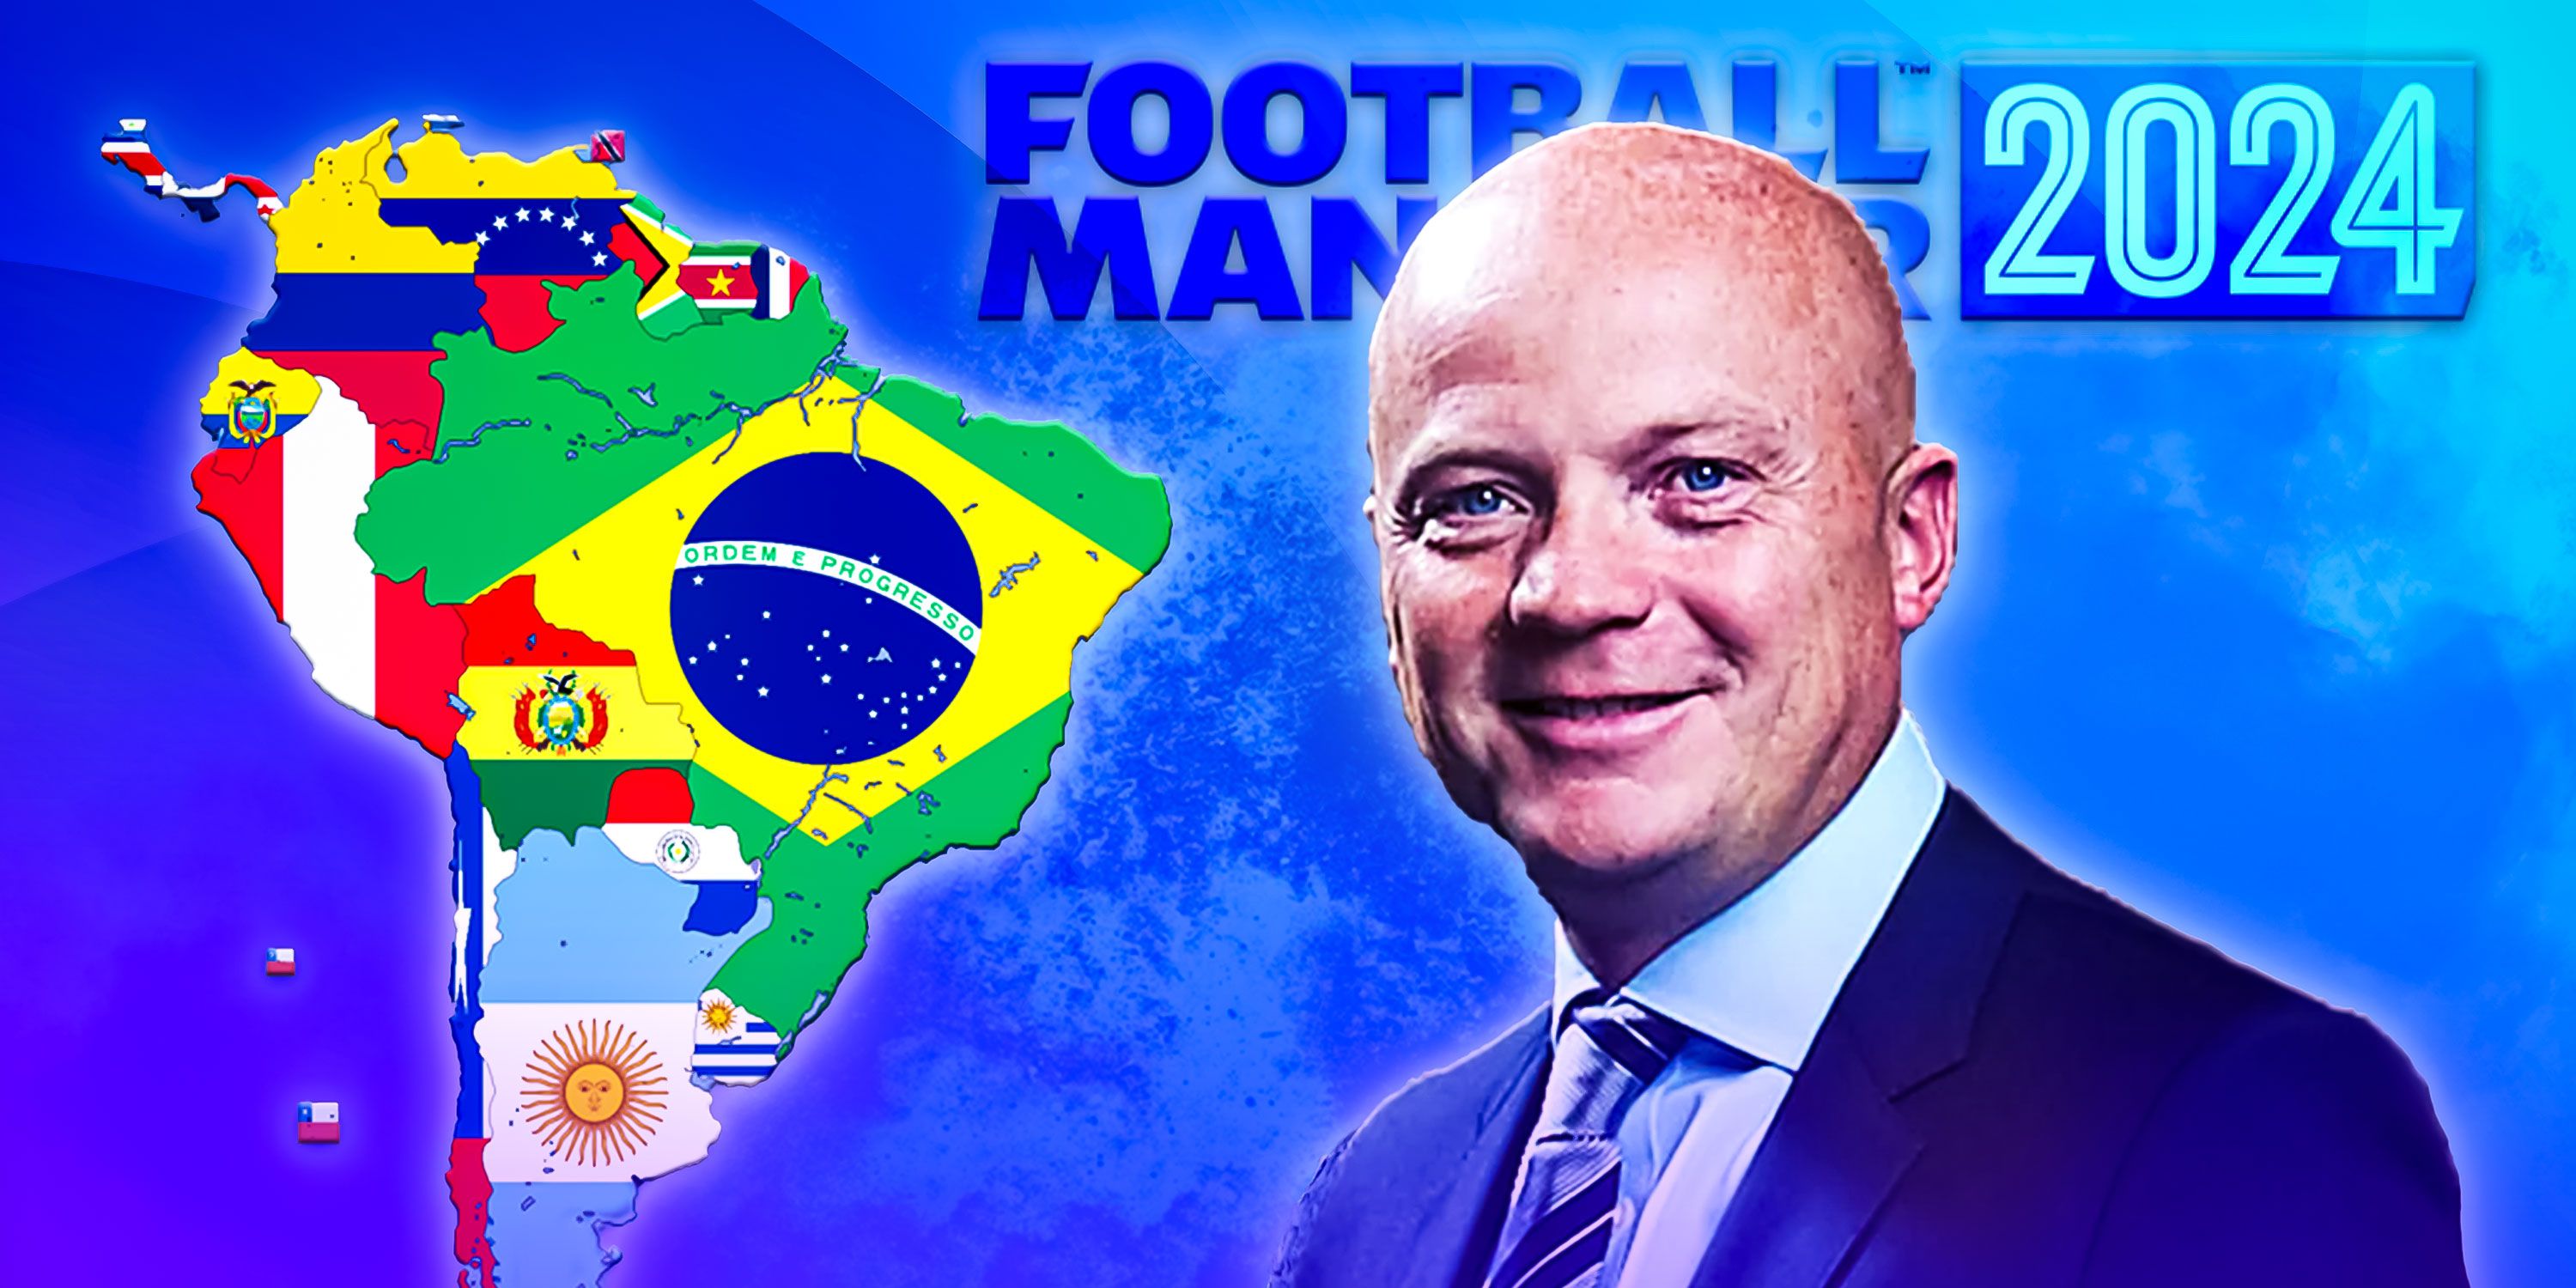 A football scout with a map of South America and the Football Manager 2024 logo.